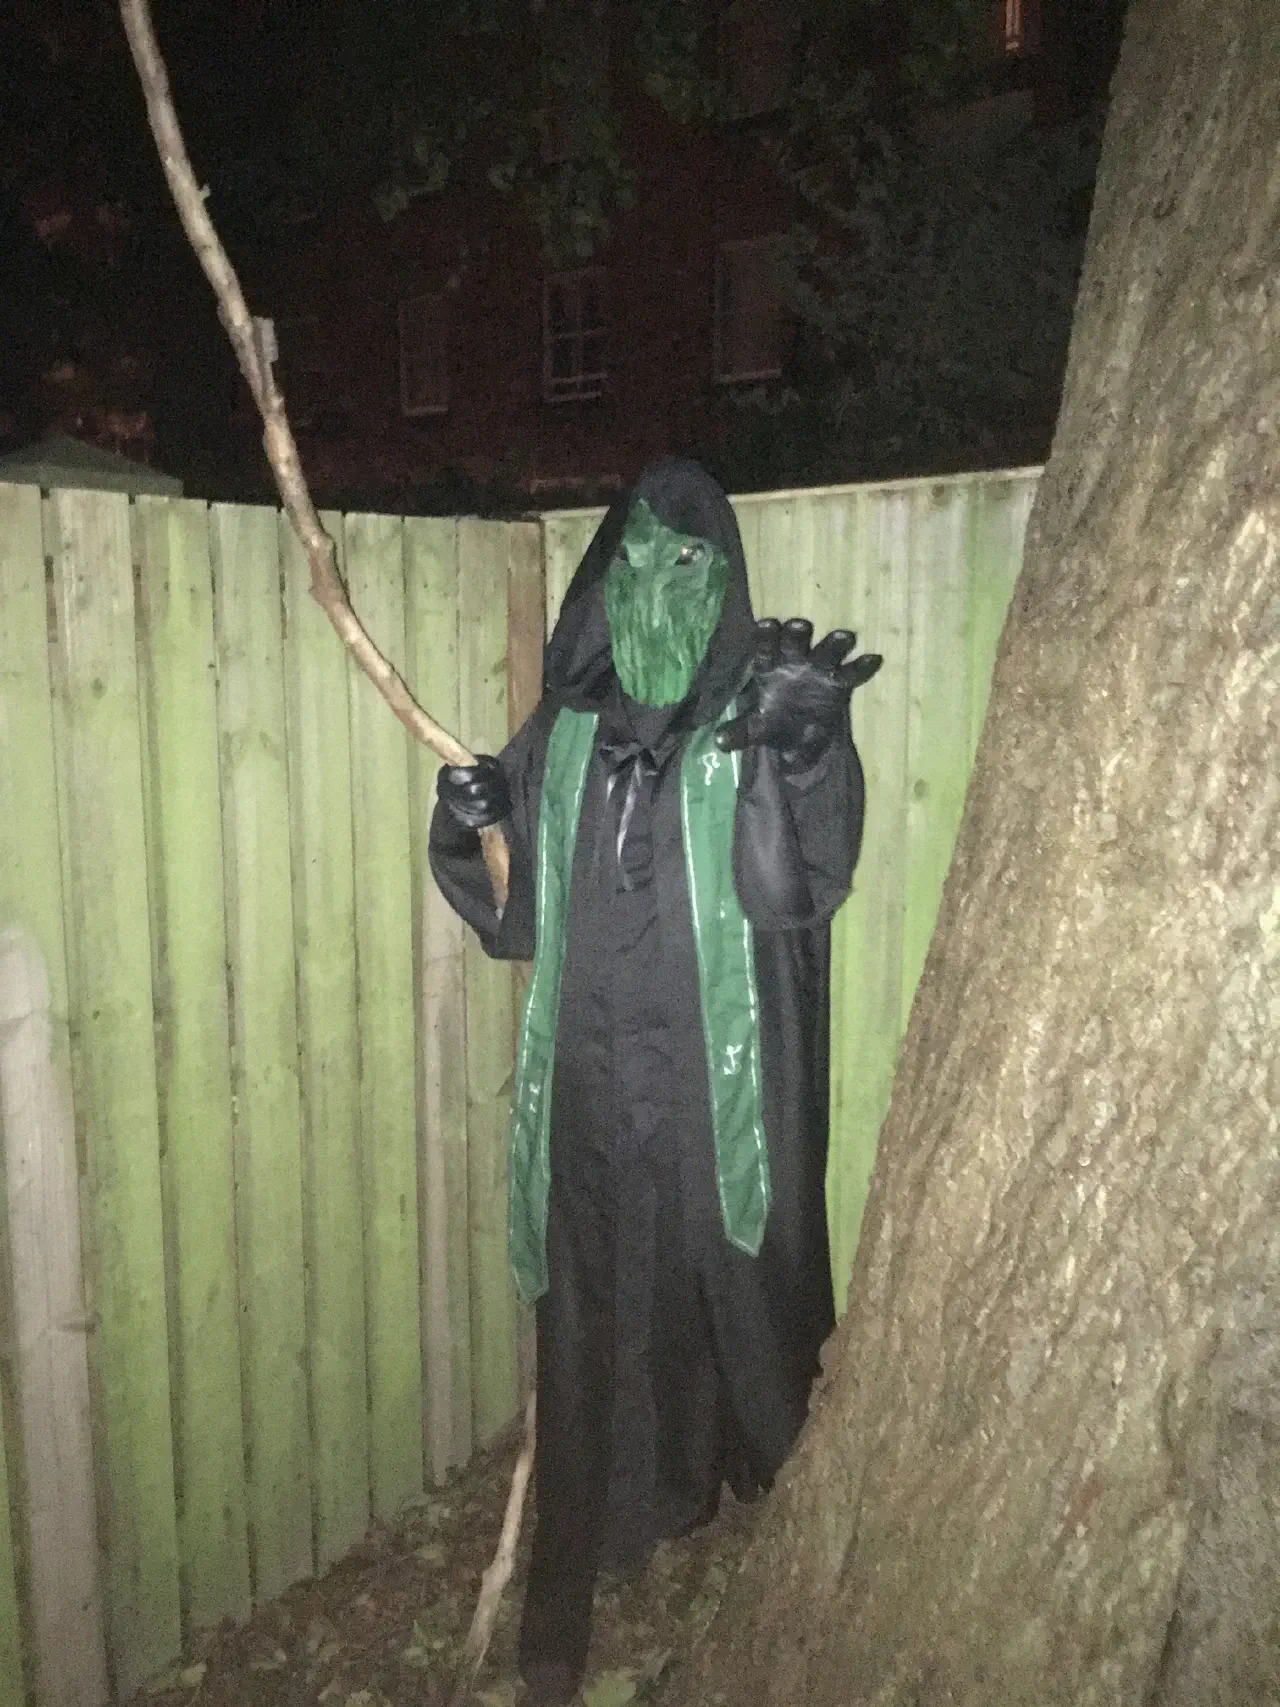 An hooded and cloaked figure in black wearing a green tentacled mask and a green sash covered in symbols reaches ominously at the photographer.